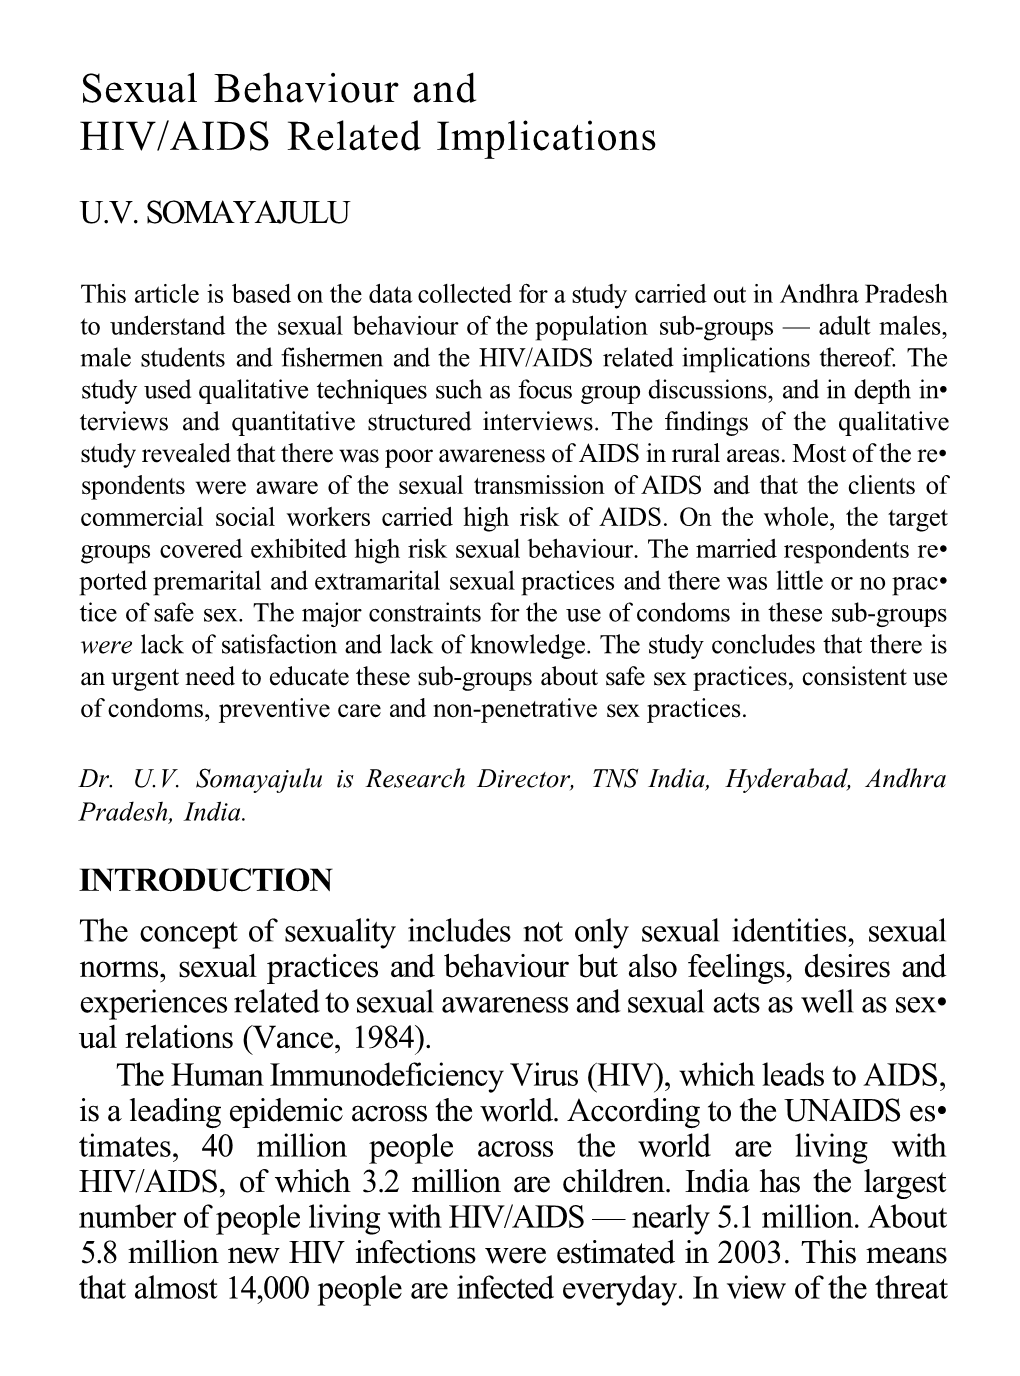 Sexual Behaviour and HIV/AIDS Related Implications